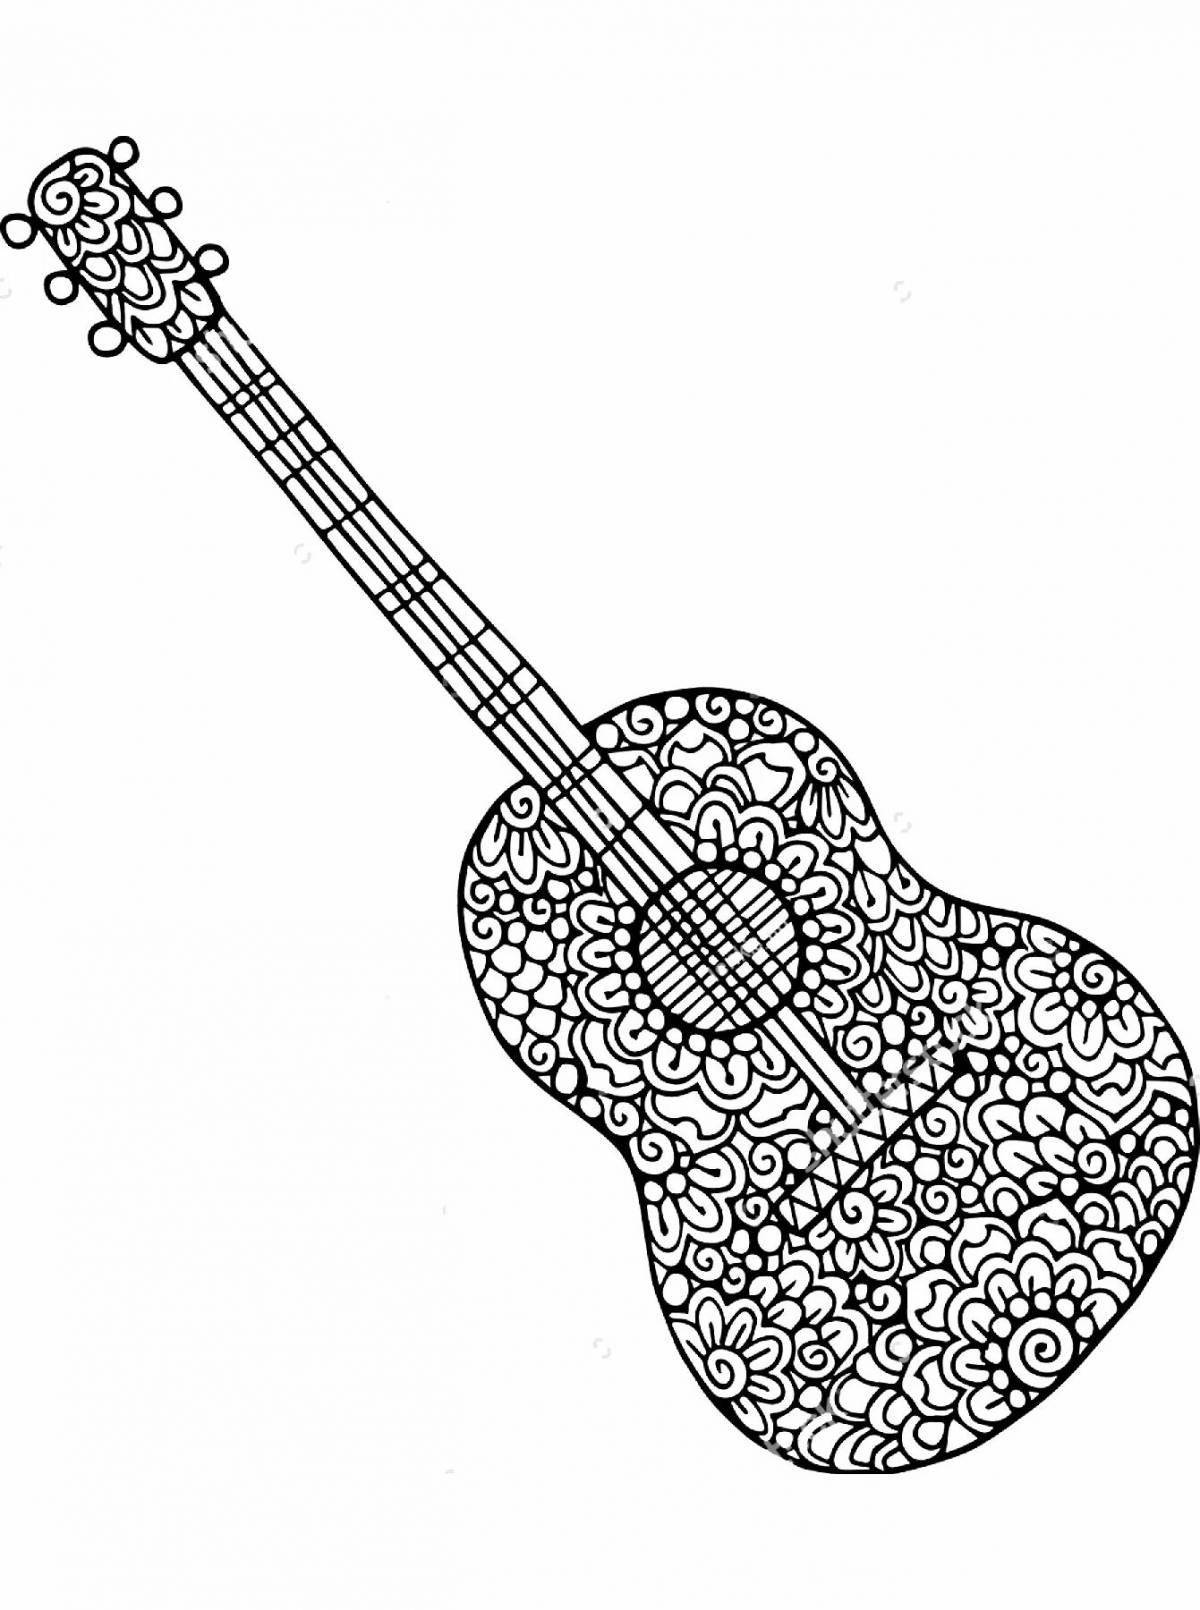 Colorful coloring book for kids with a guitar